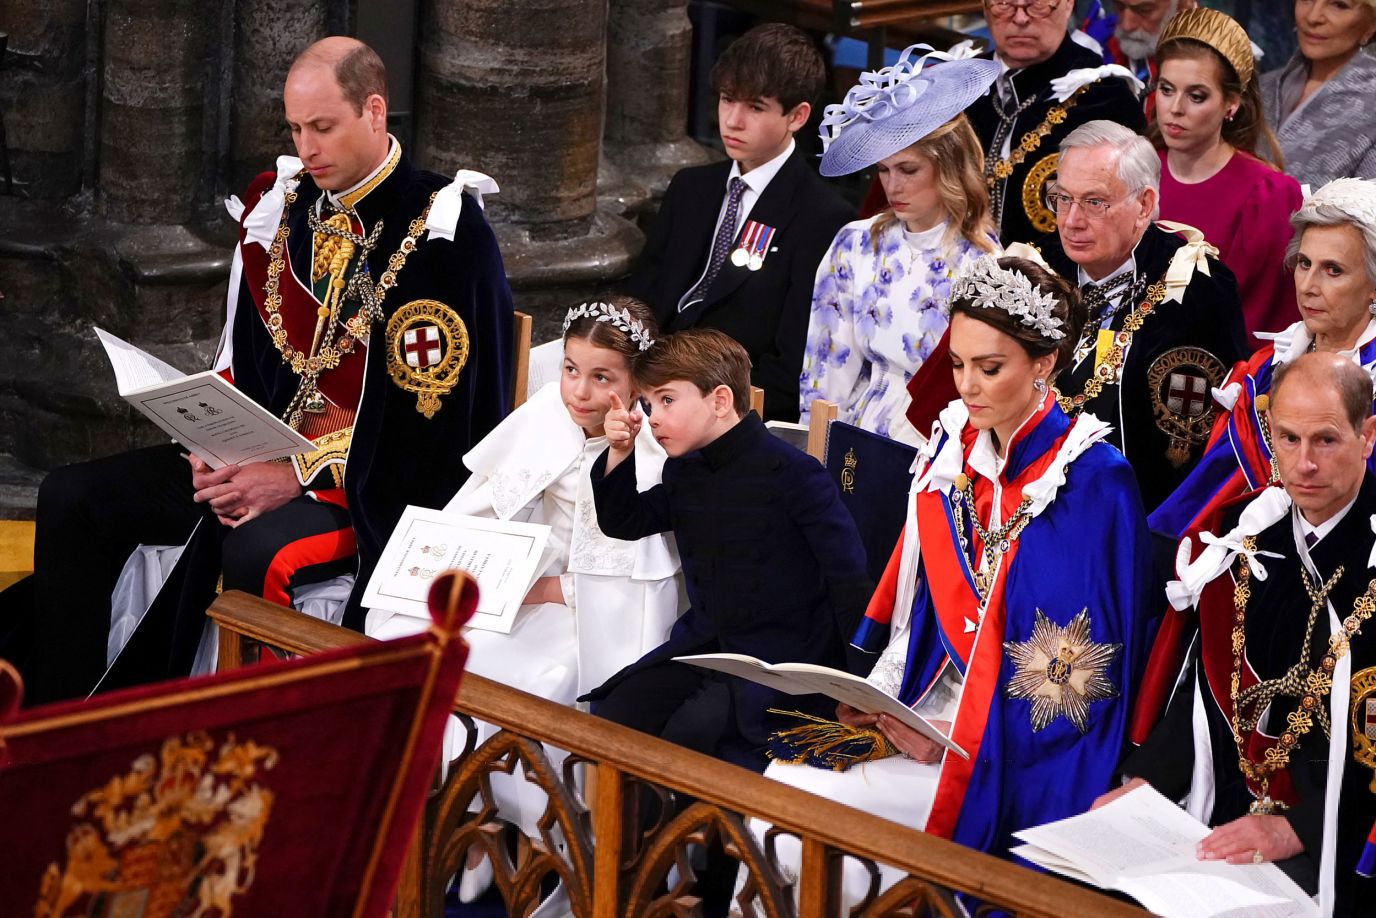 Prince Louis, one of the King's grandsons, points out something to his sister, Princess Charlotte, during the ceremony. They are flanked by their parents, Prince William and Catherine, the Princess of Wales.